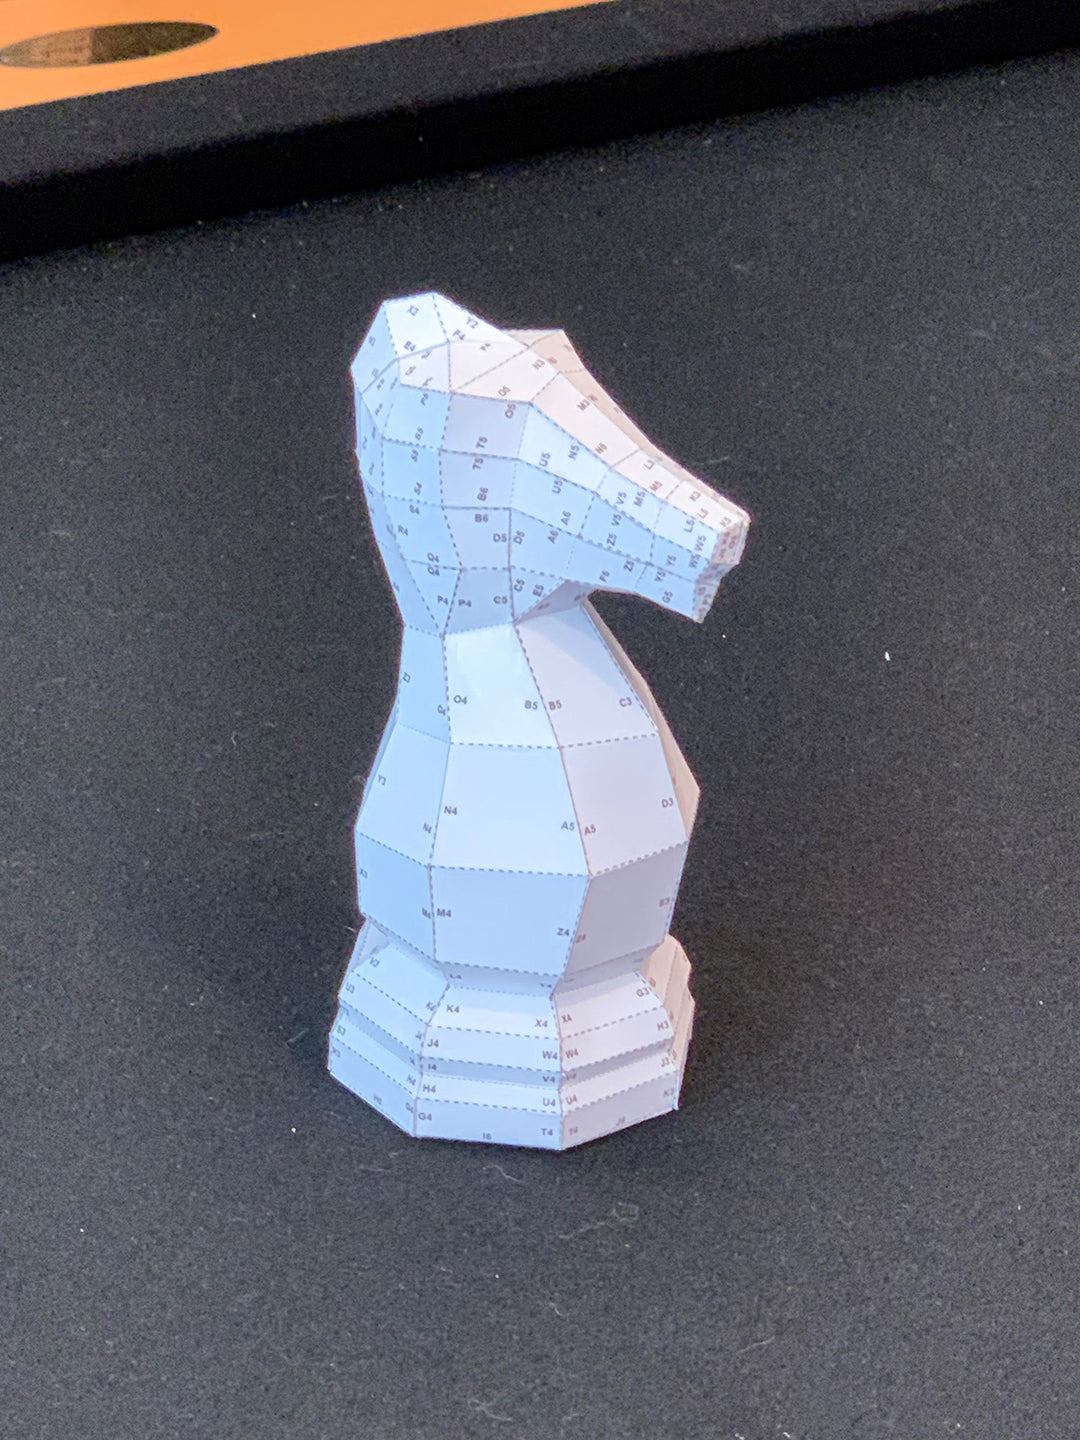 Giant Chess Piece - KNIGHT DIY Low Poly Paper Model Template, Paper Craft